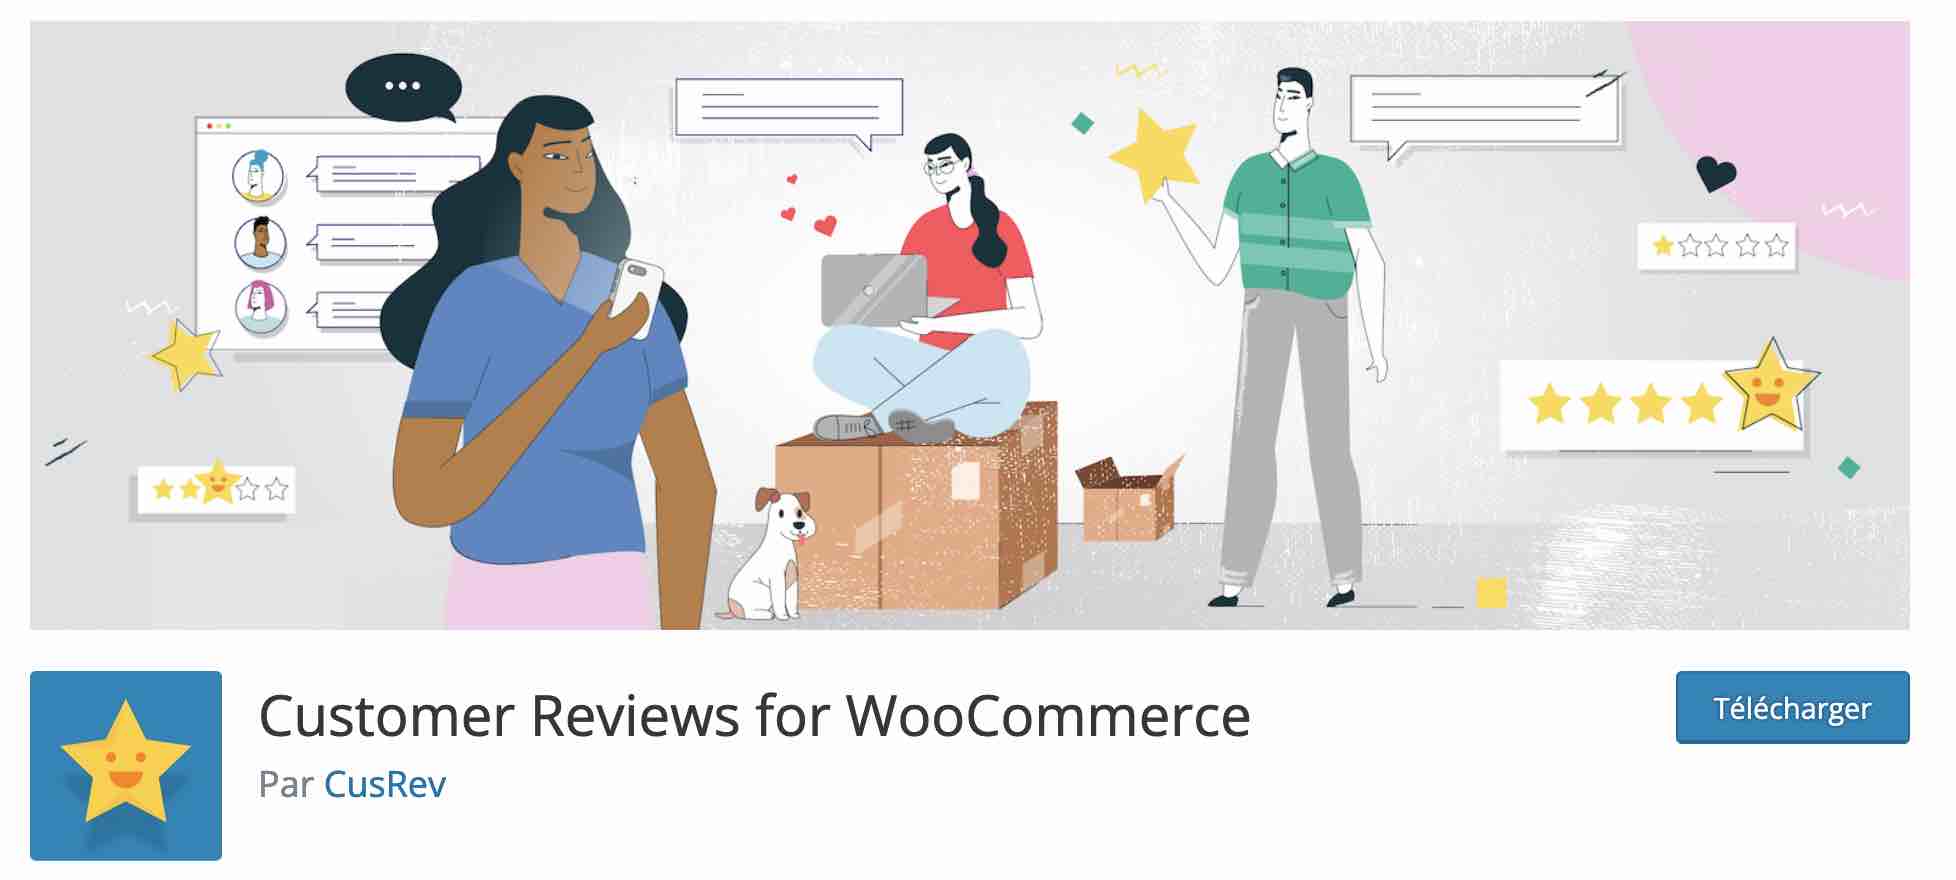 Customer Reviews for WooCommerce.